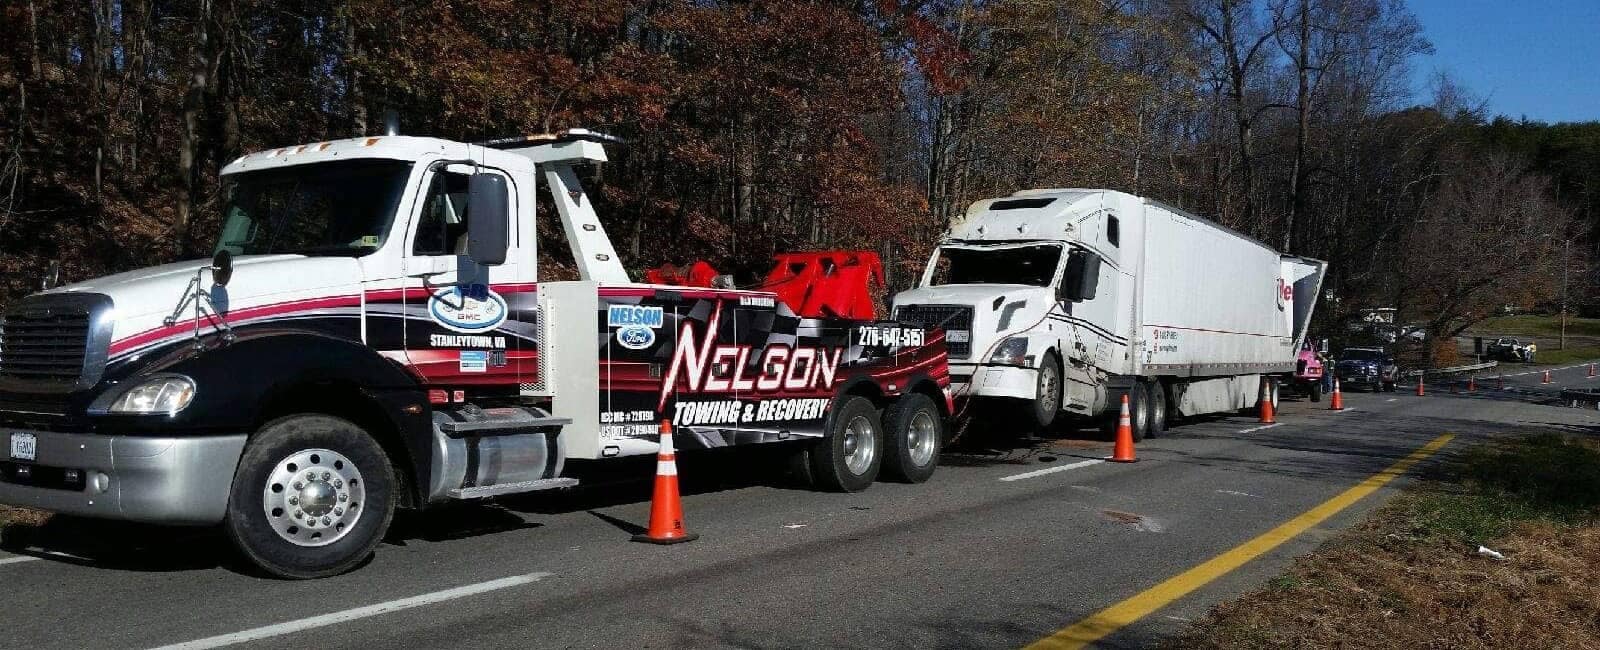 Nelson Towing